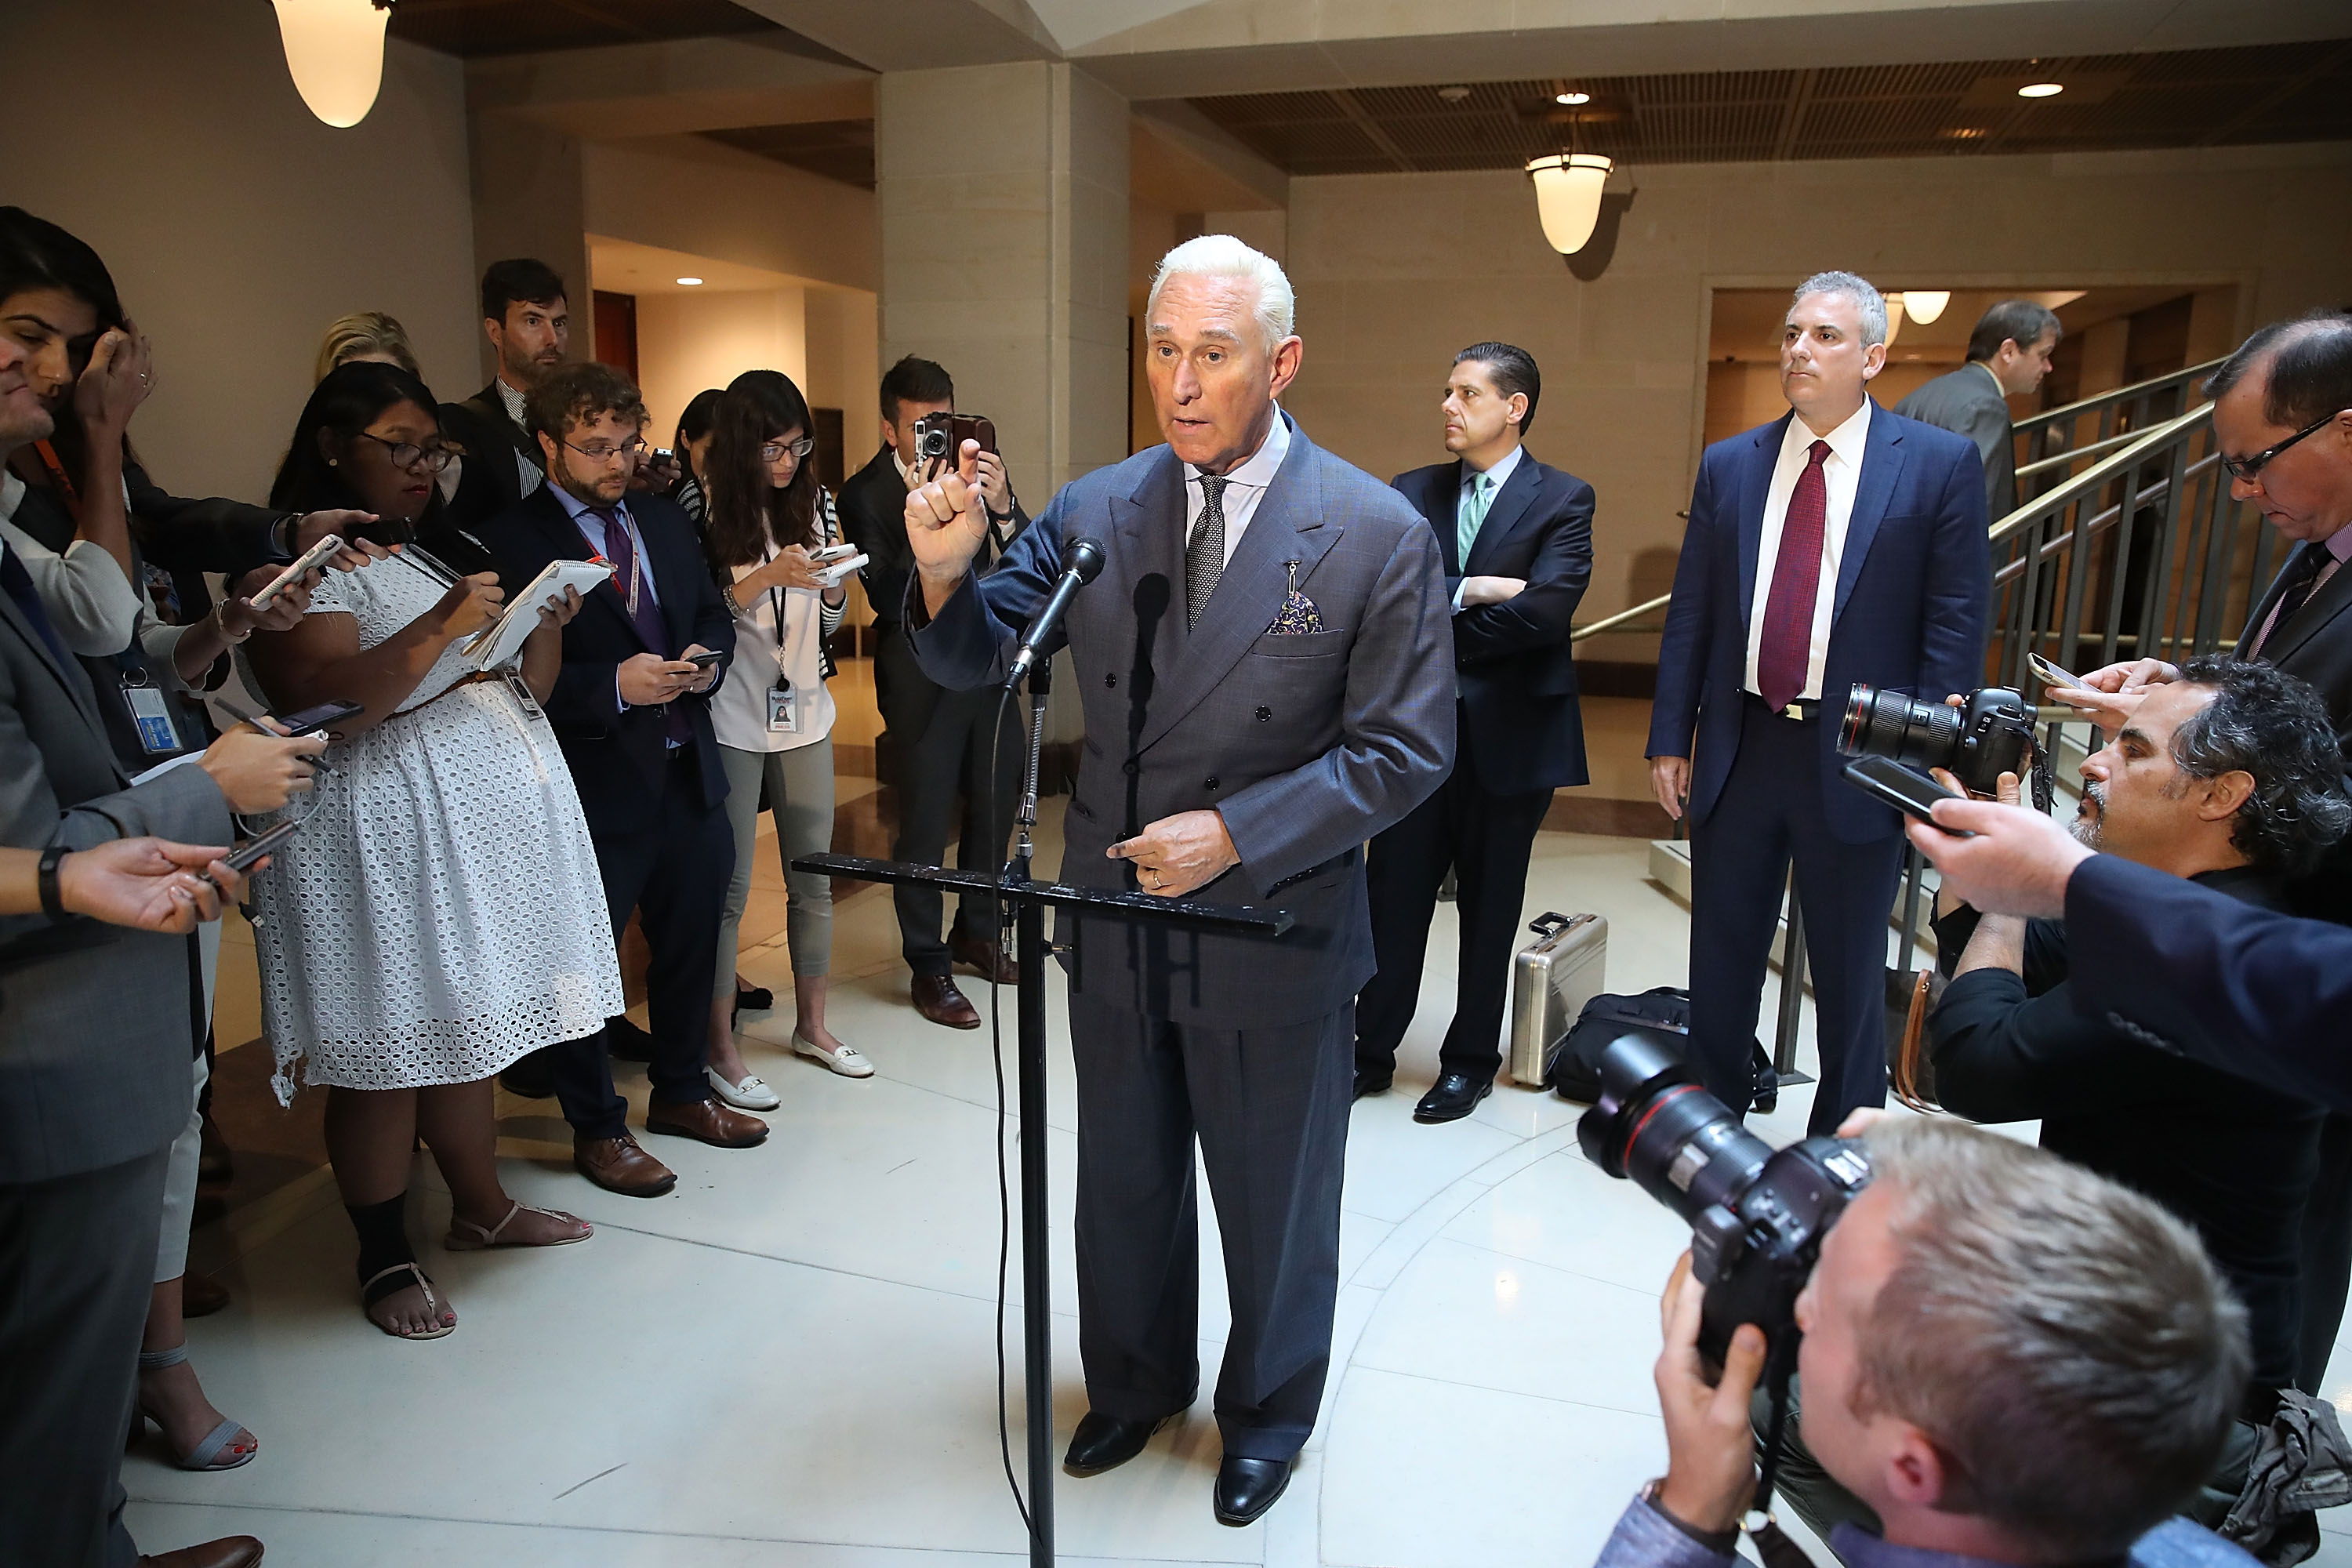 Roger Stone, former confidant to President Trump, speaks to the media after appearing before the House Intelligence Committee during a closed door hearing on September 26, 2017. (Mark Wilson&mdash;Getty Images)